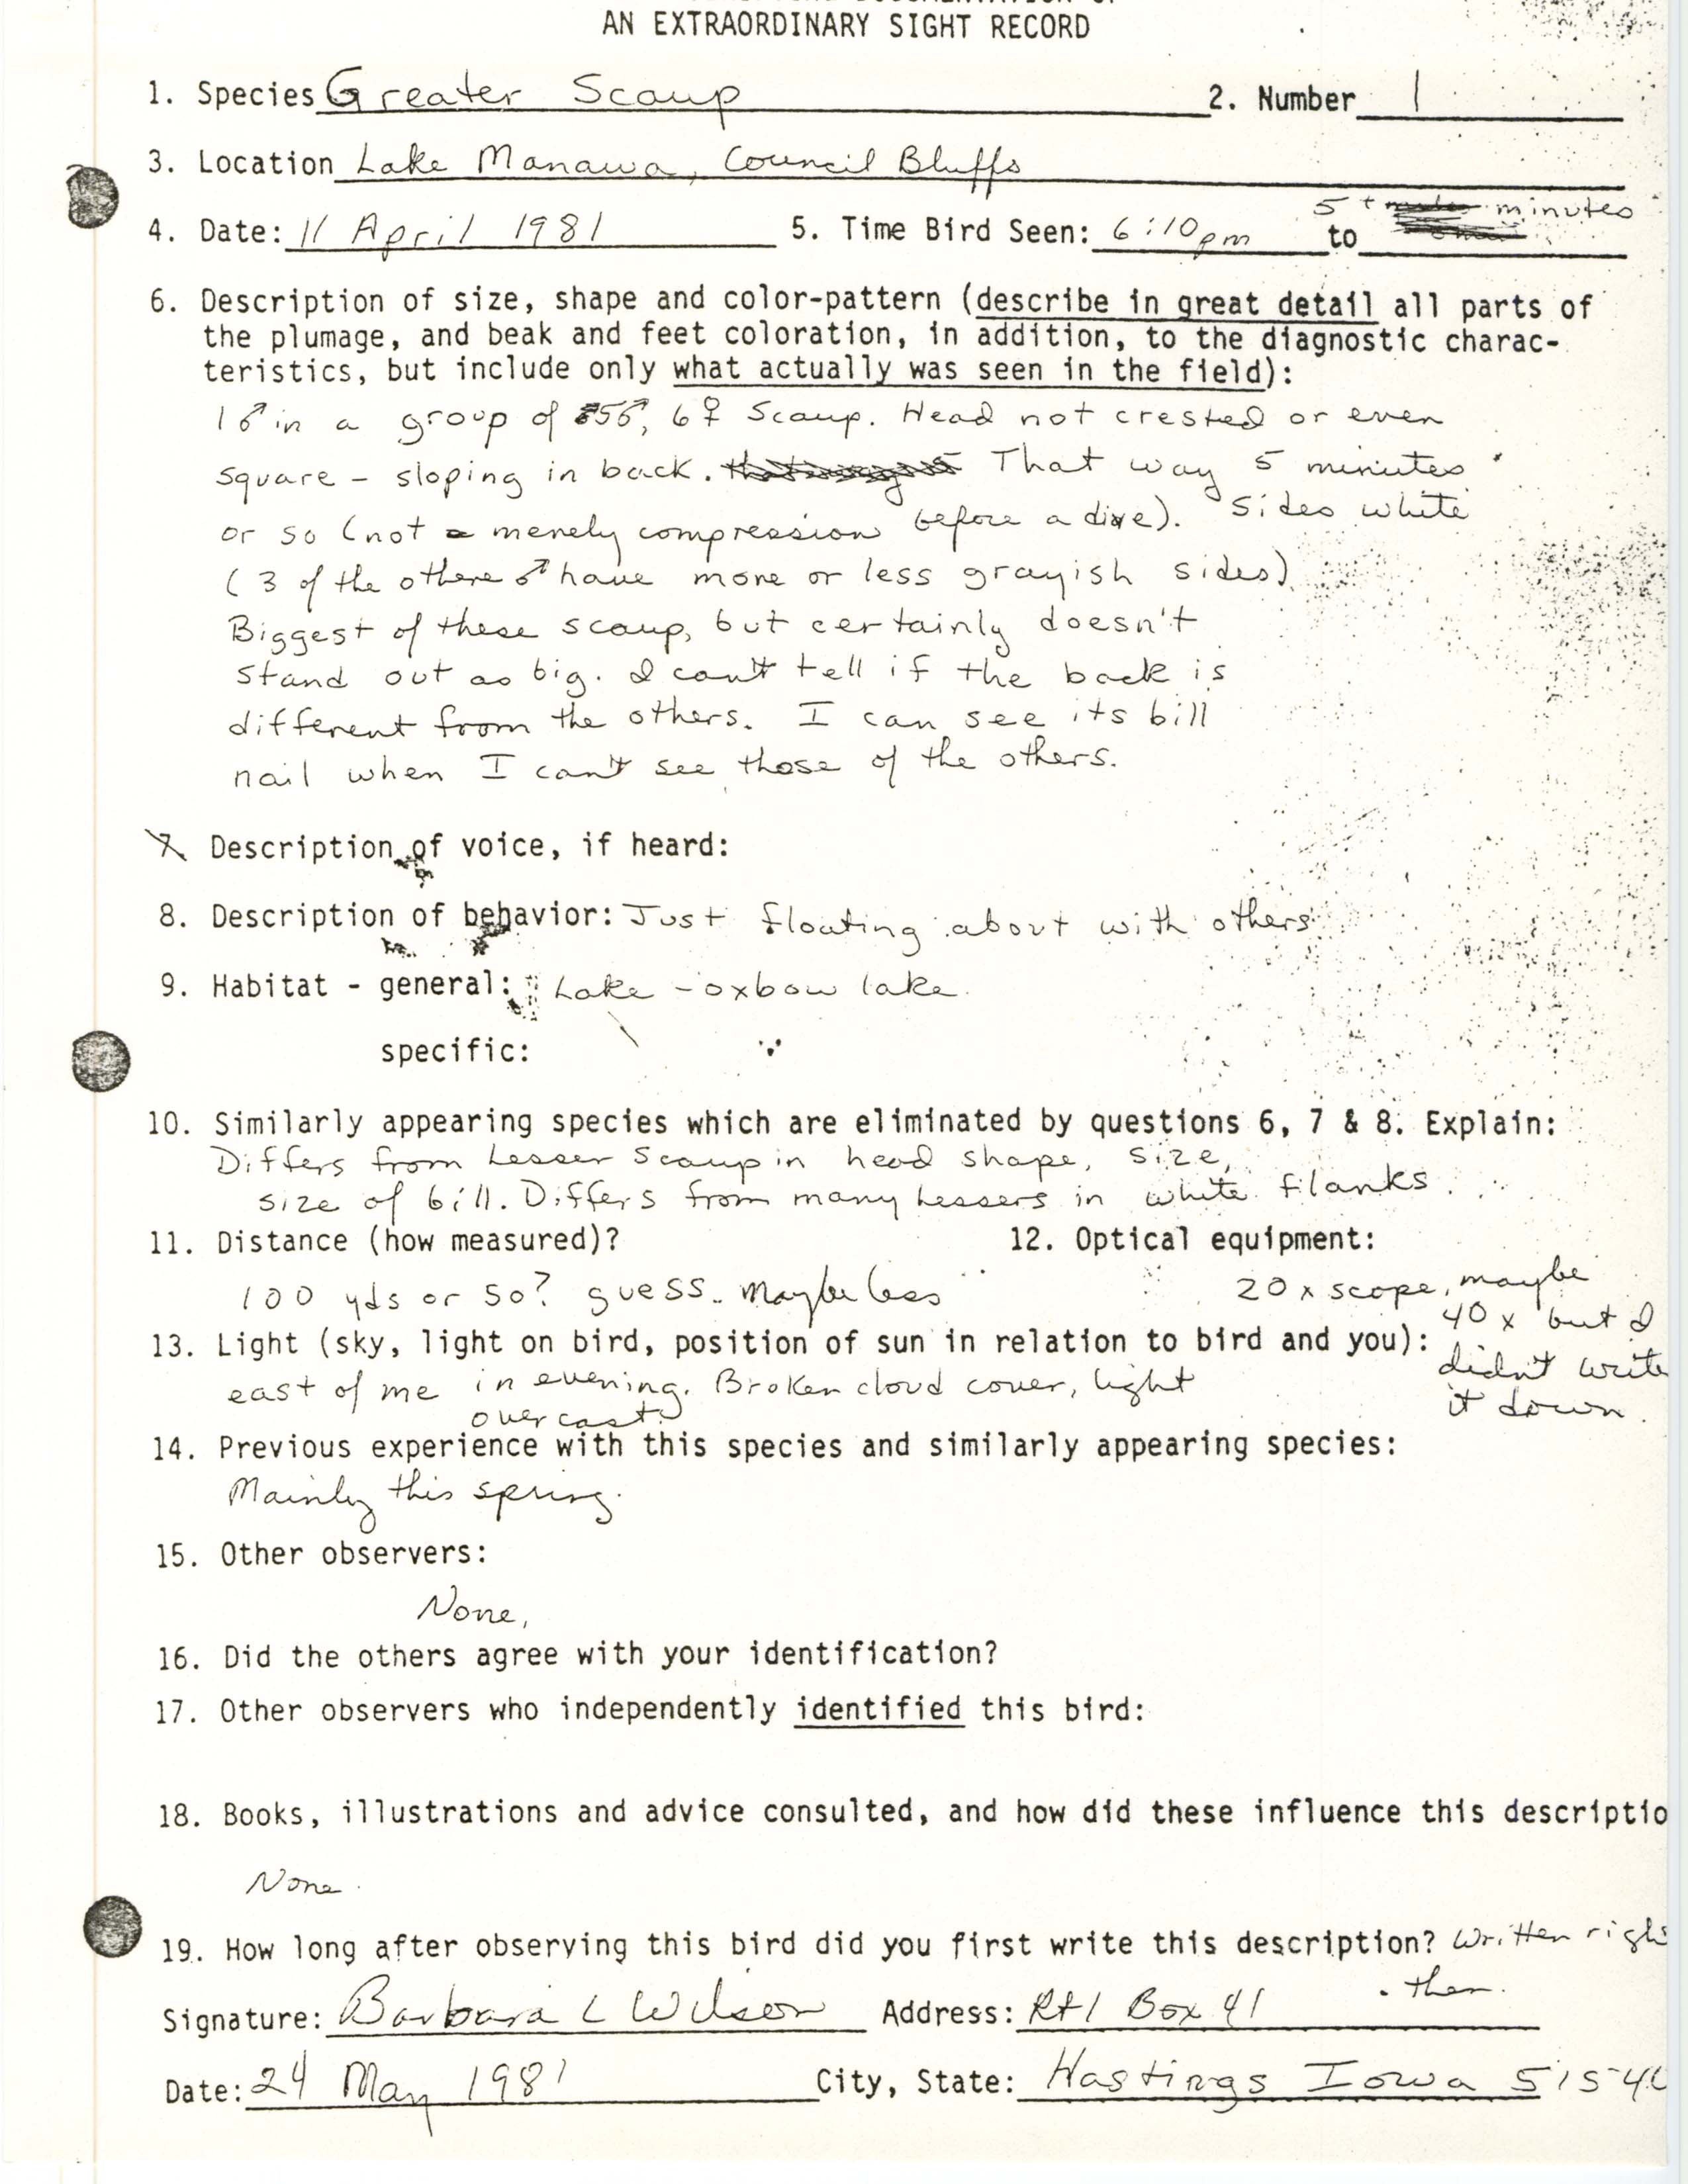 Rare bird documentation form for Greater Scaup at Lake Manawa, 1981